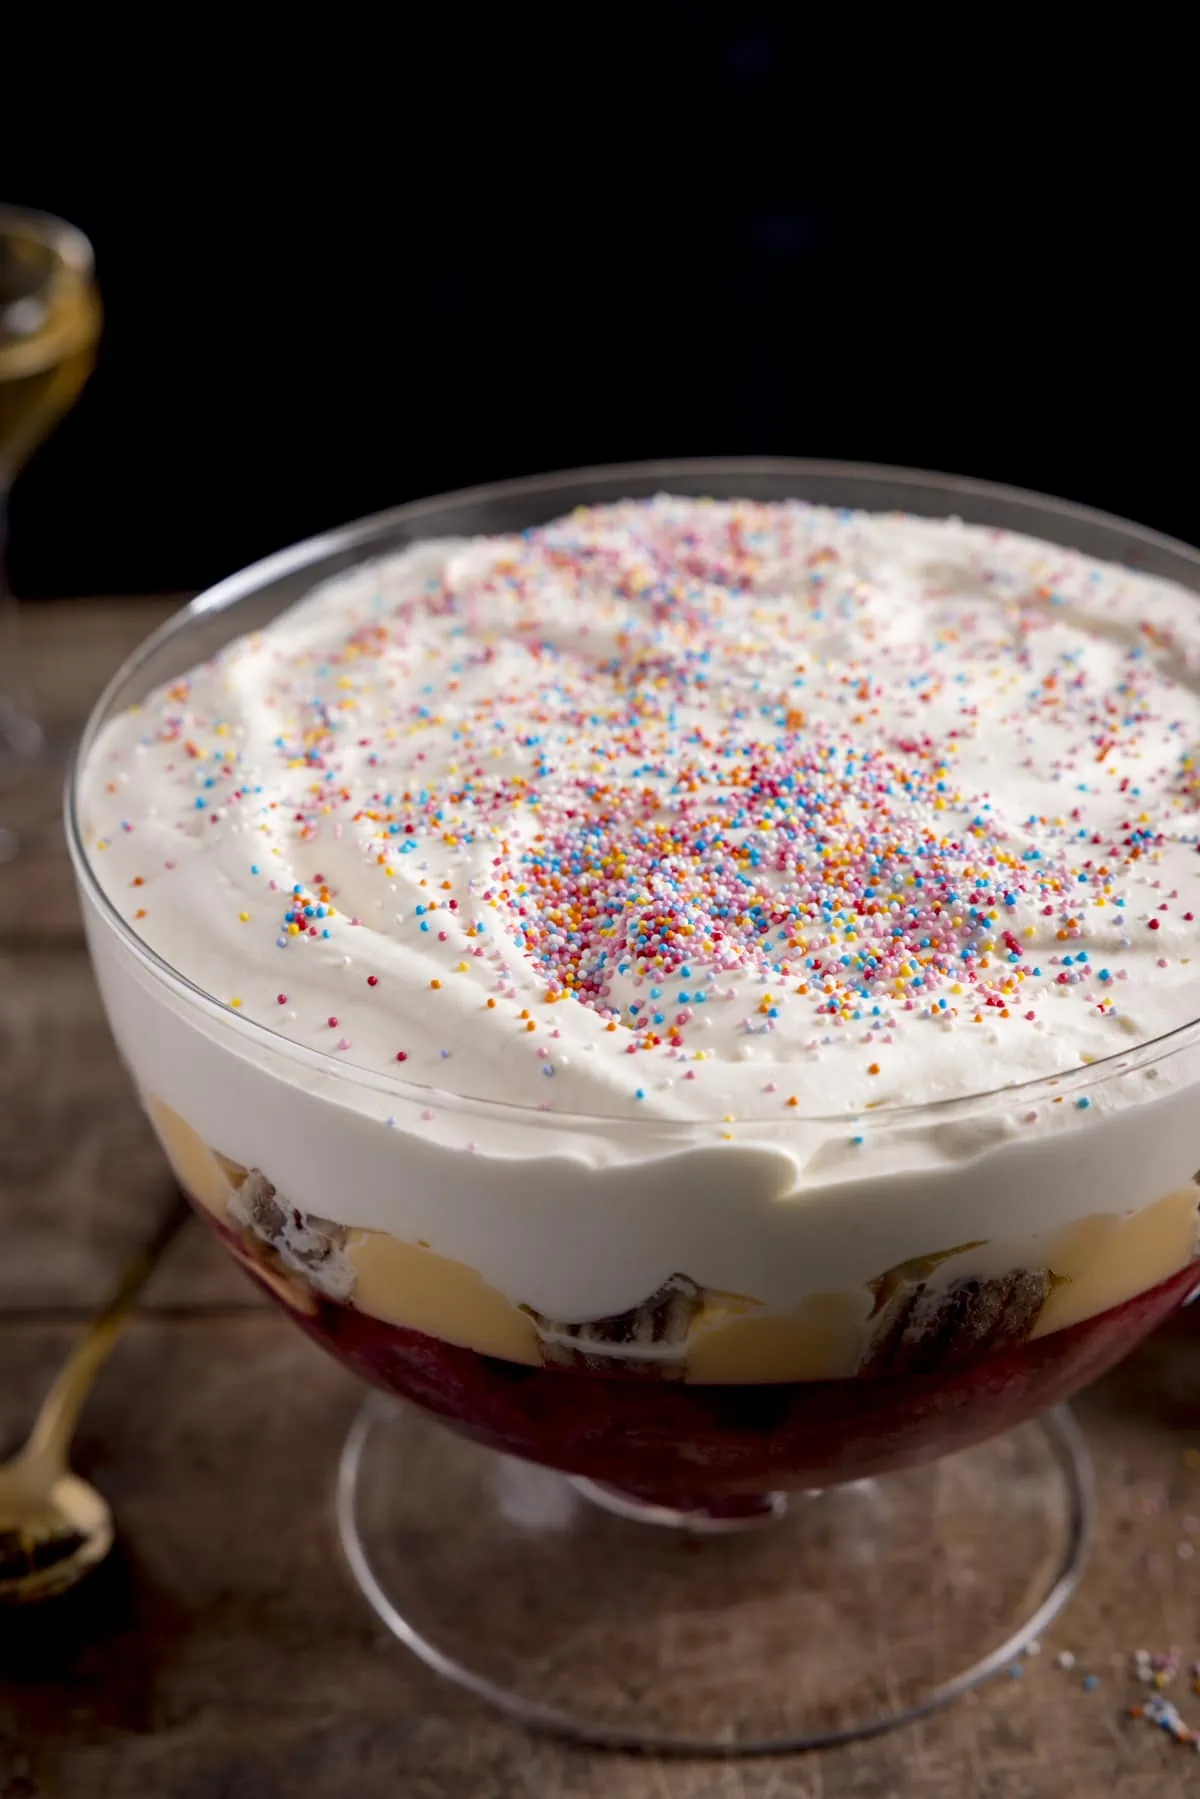 Sherry trifle, topped with sprinkles, on a wooden table.